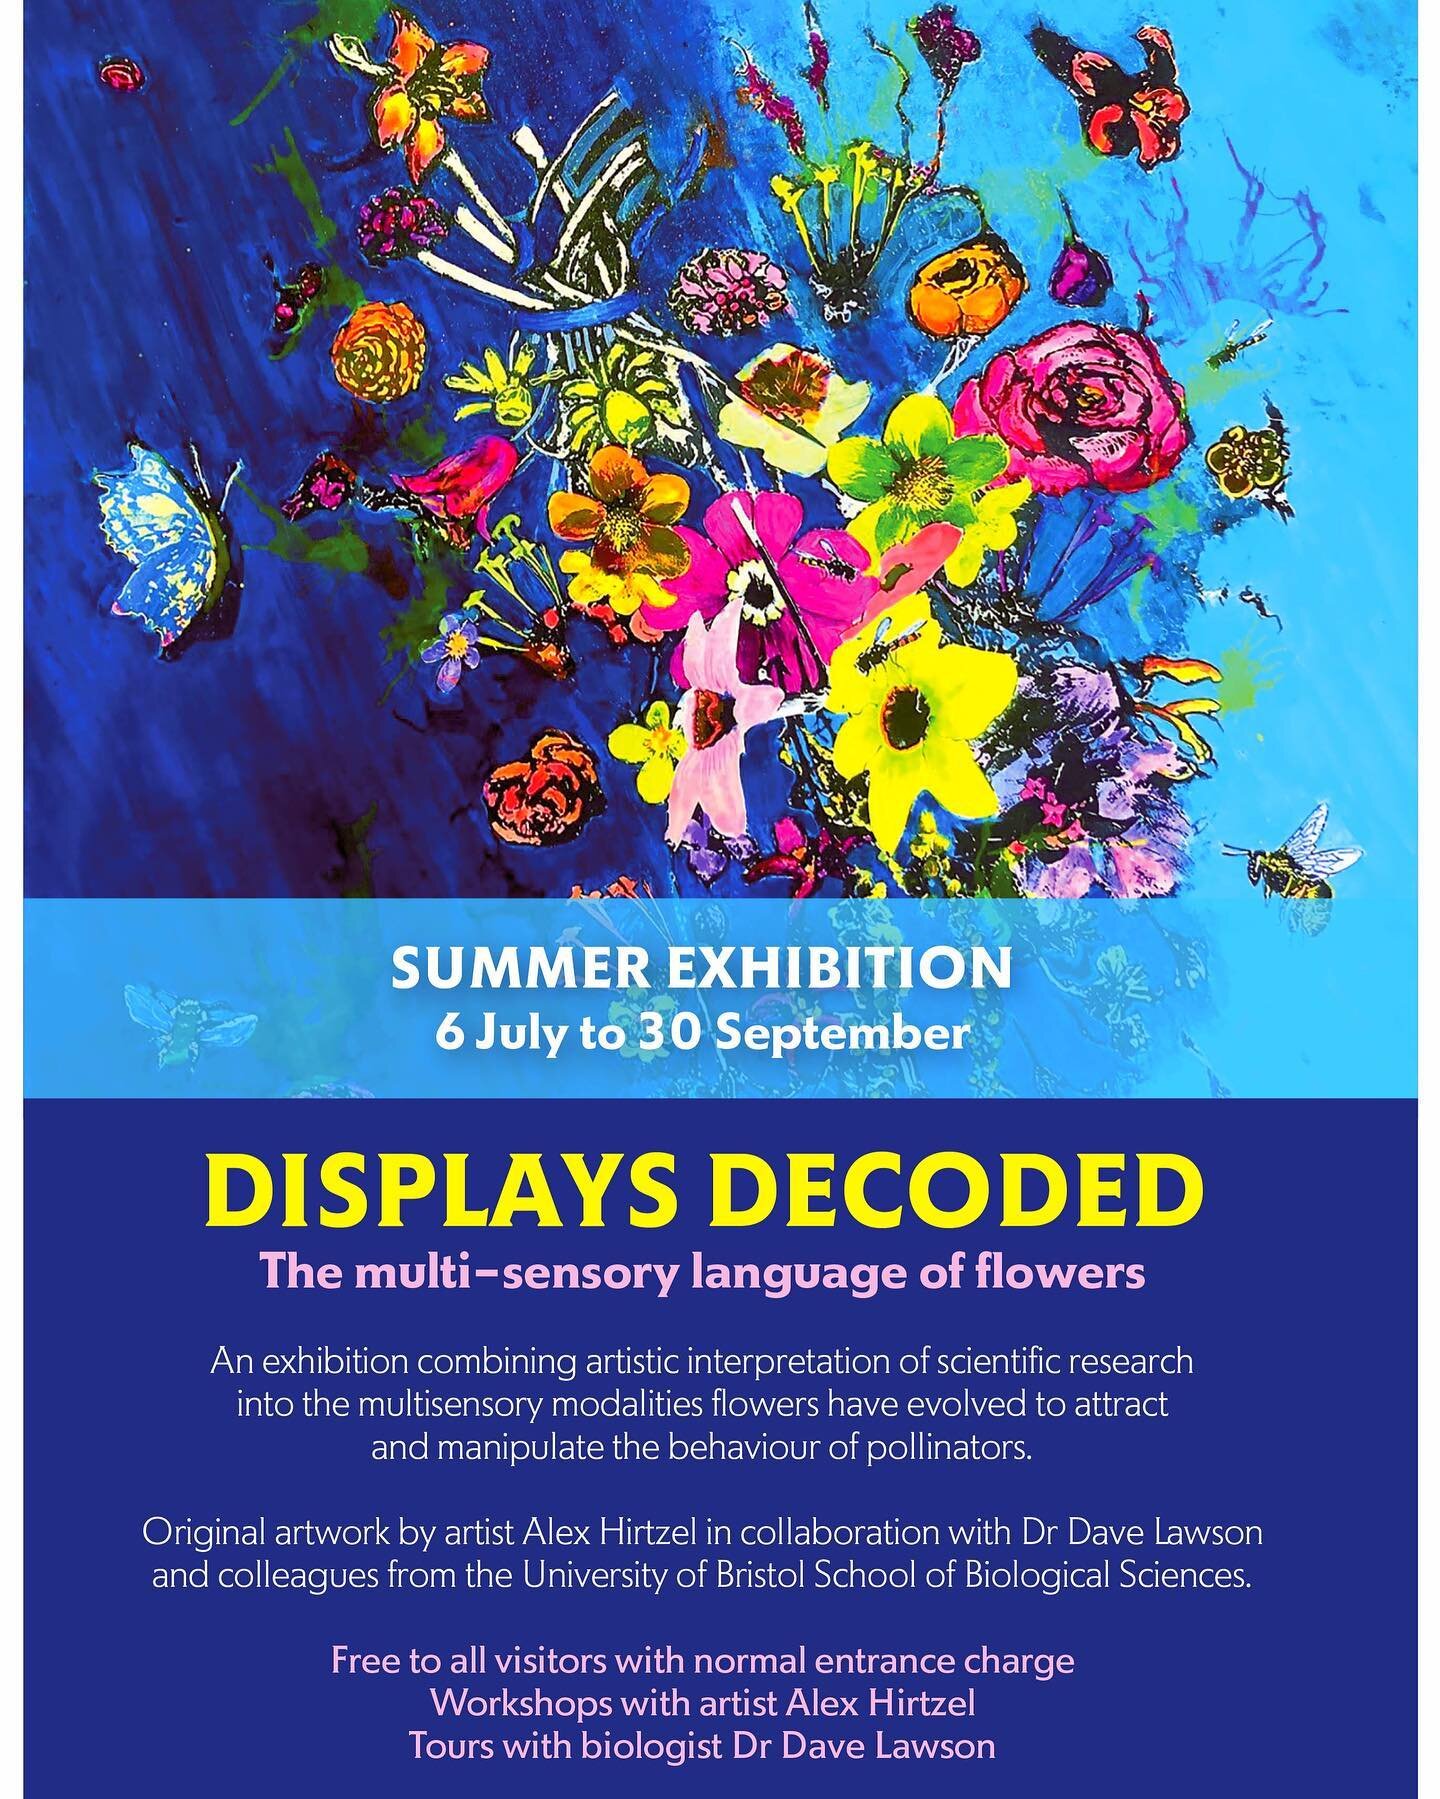 🐝EXHIBITION LAUNCH🐝 final set up day tomorrow w/ @brisbotanicgdn &hellip;so excited to open to the public from Weds! More info from the link in my bio, or msg me with any questions #DisplaysDecoded 🎉🐝